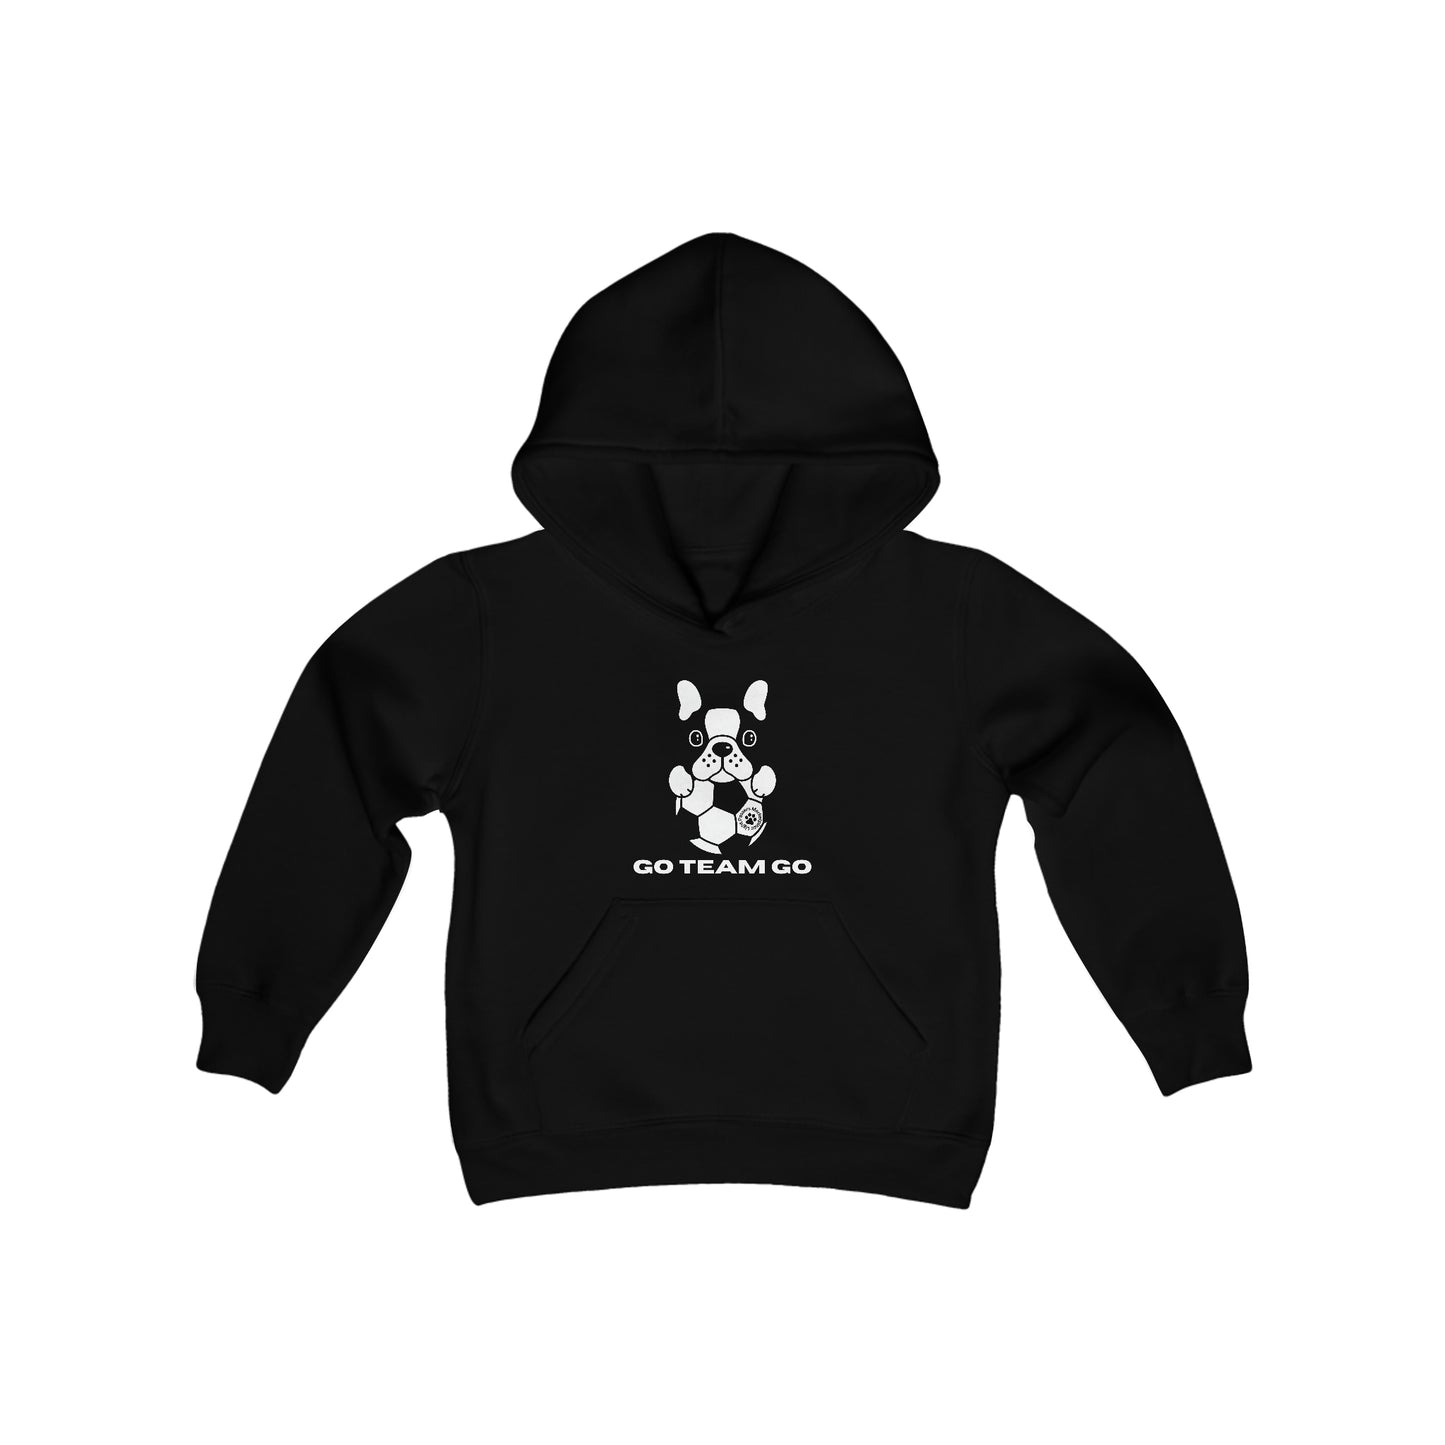 Light Passers Marketplace Soccer Dog Youth Hooded Sweatshirt, Fitness, Mental Health, Simple Messages